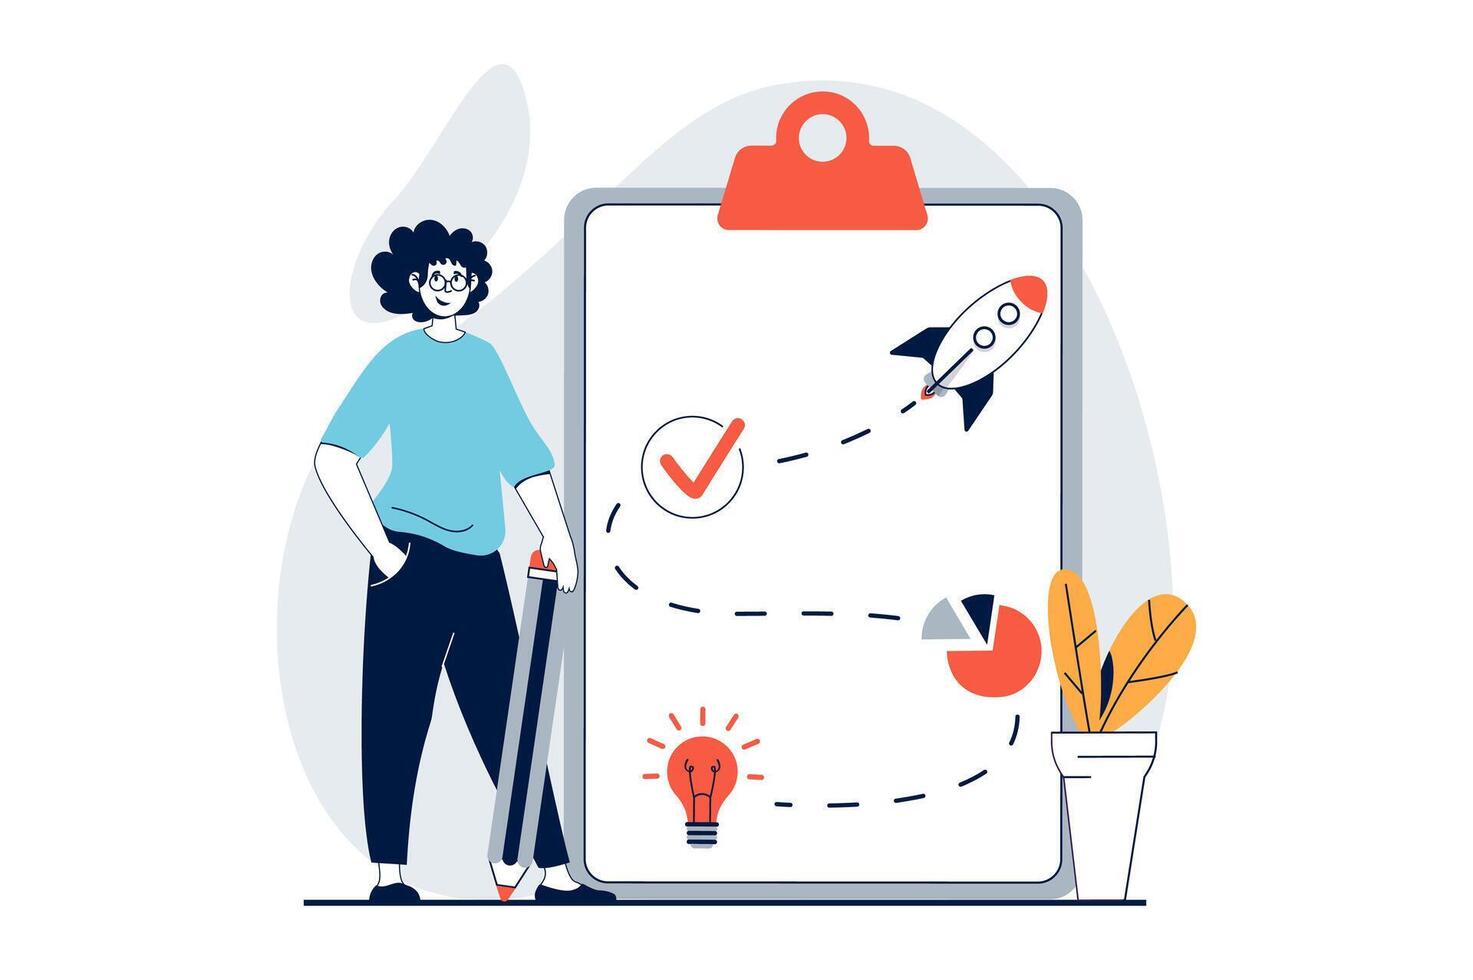 Strategic planning concept with people scene in flat design for web. Man creating success plan of startup launching and developing. Vector illustration for social media banner, marketing material.